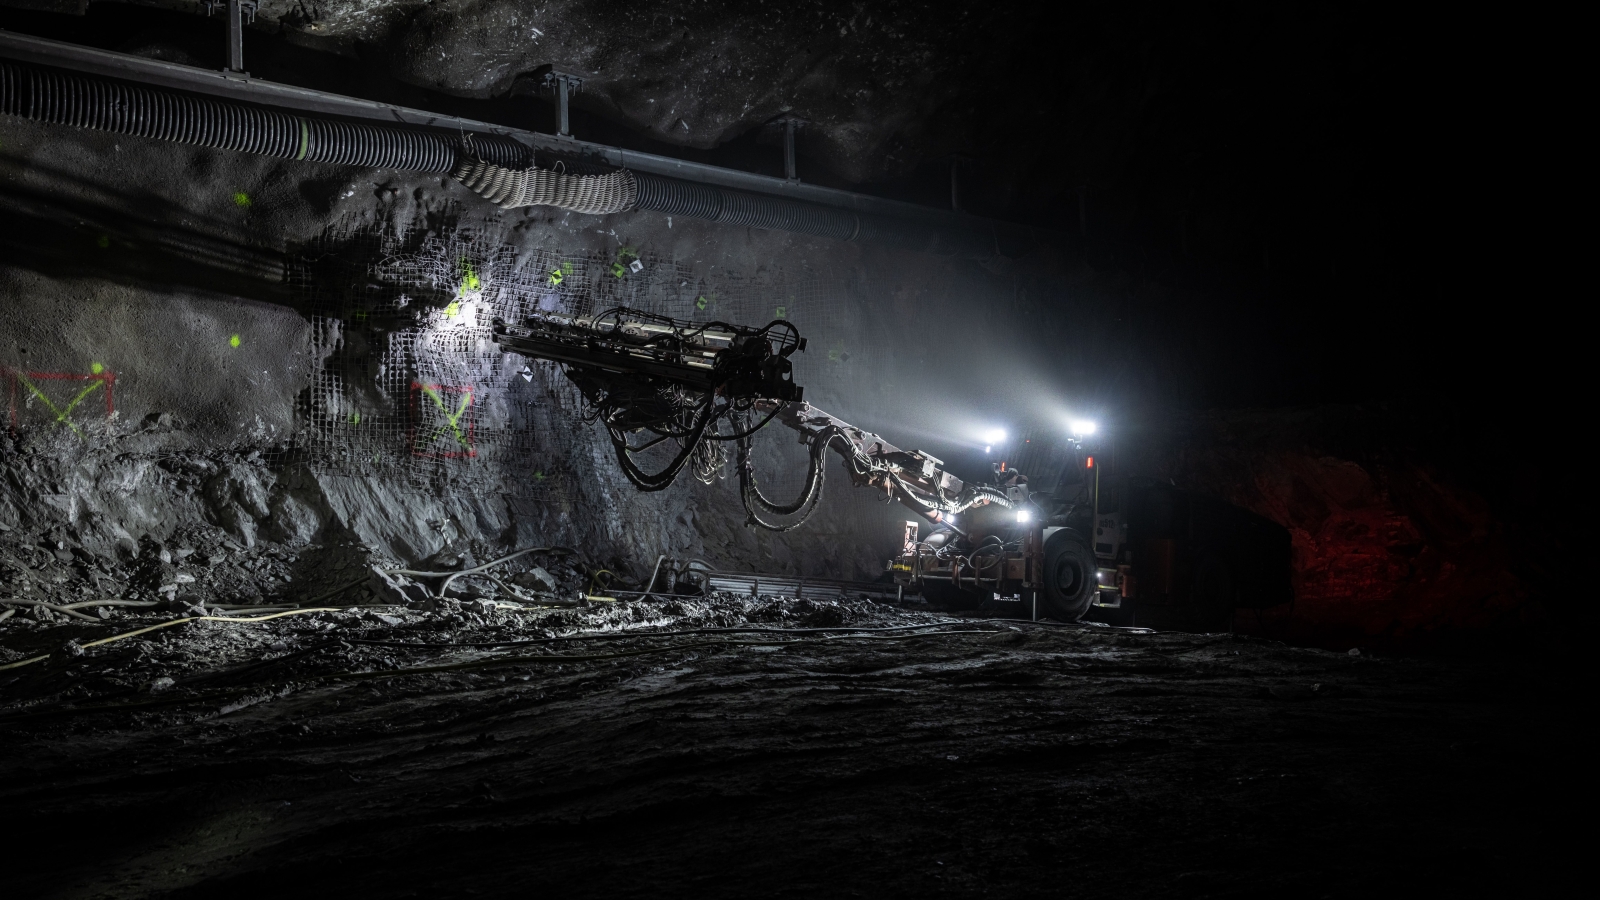 In a large cavern, excavation crew member operates a driller